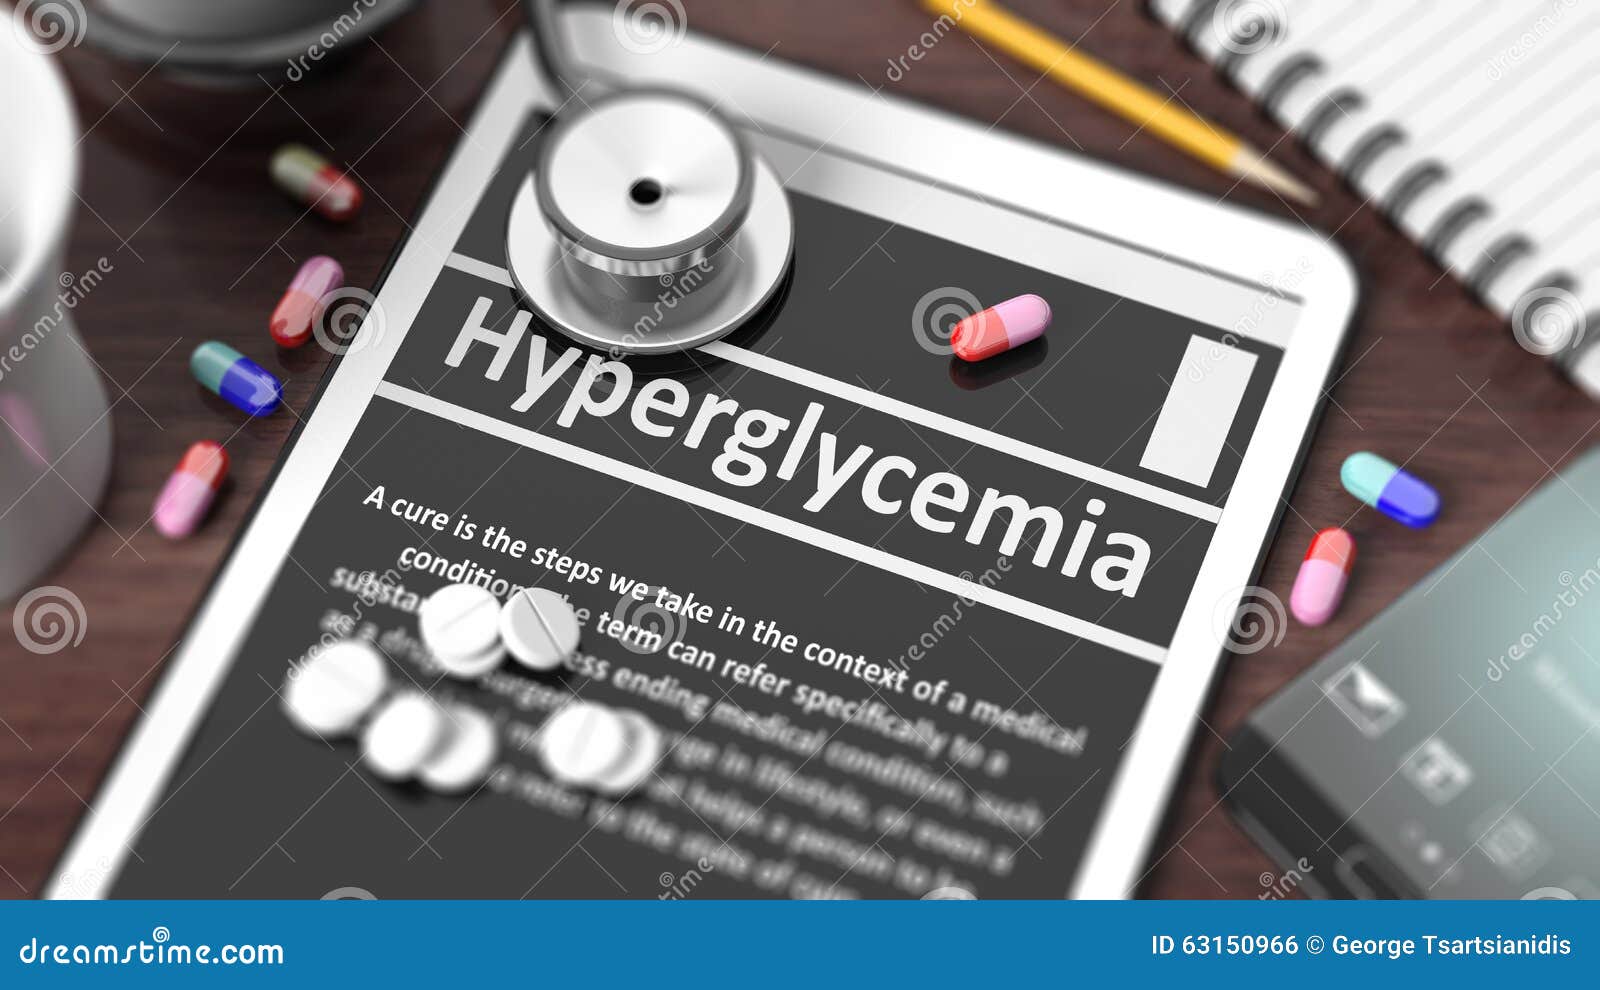 tablet with hyperglycemia on screen